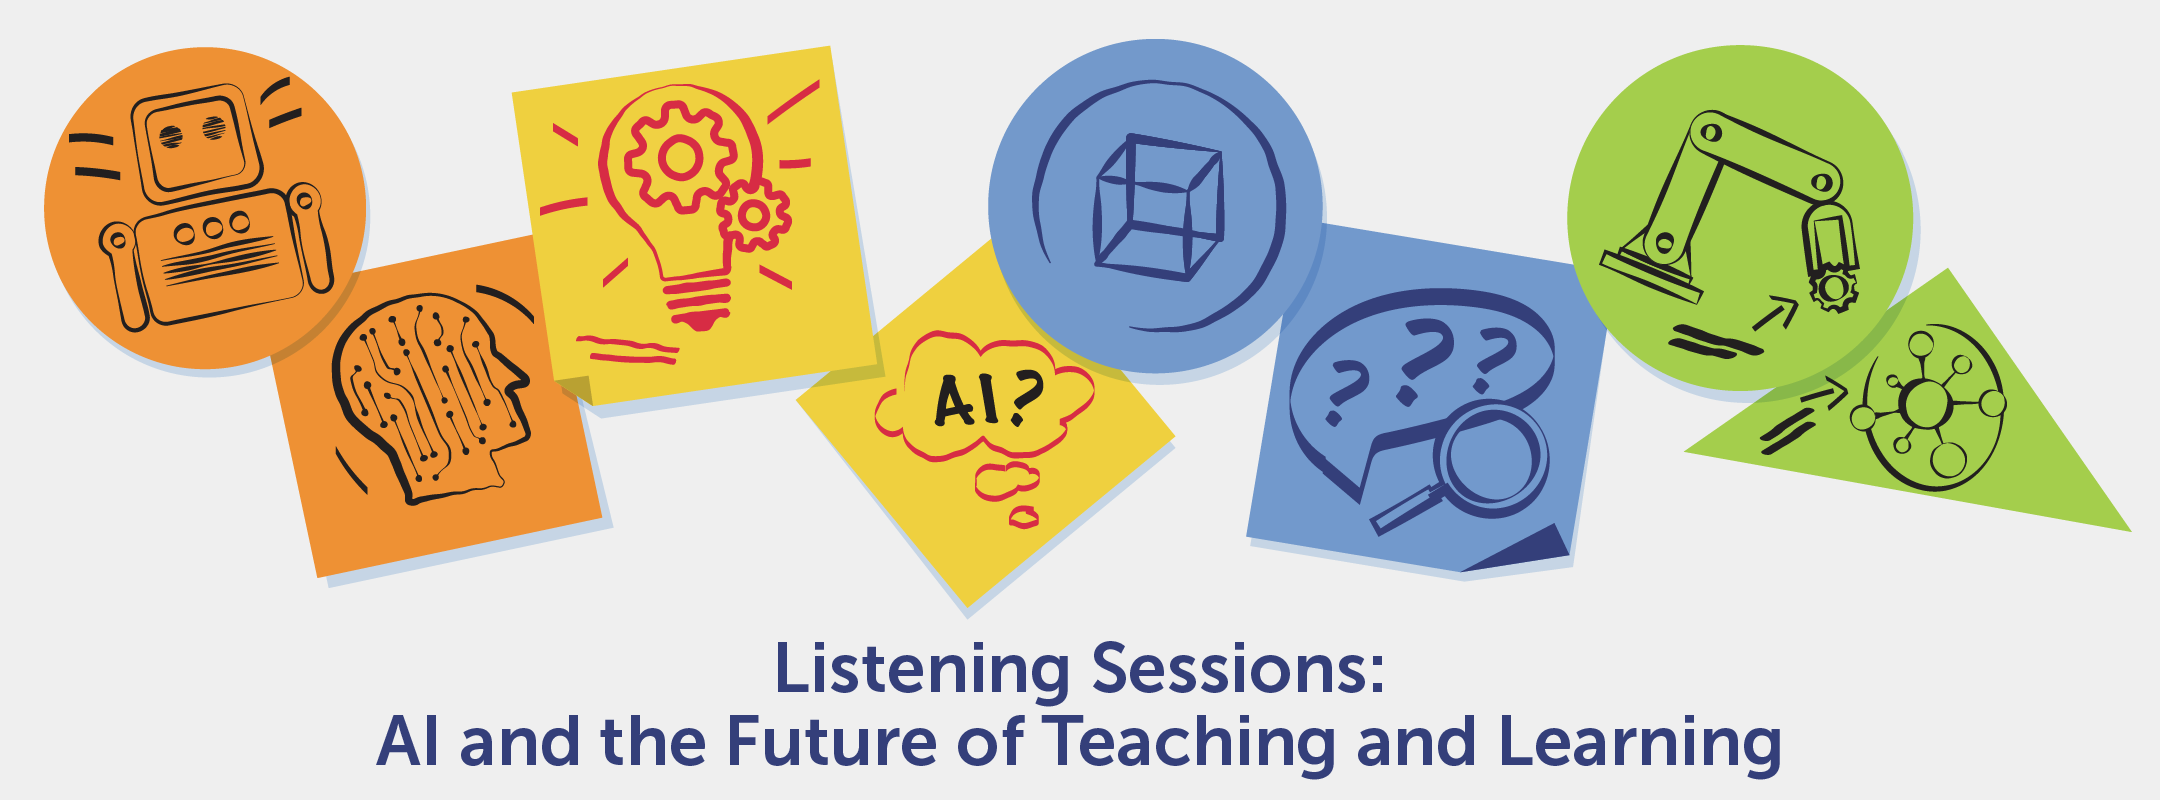 Listening Sessions: AI and the Future of Teaching and Learning